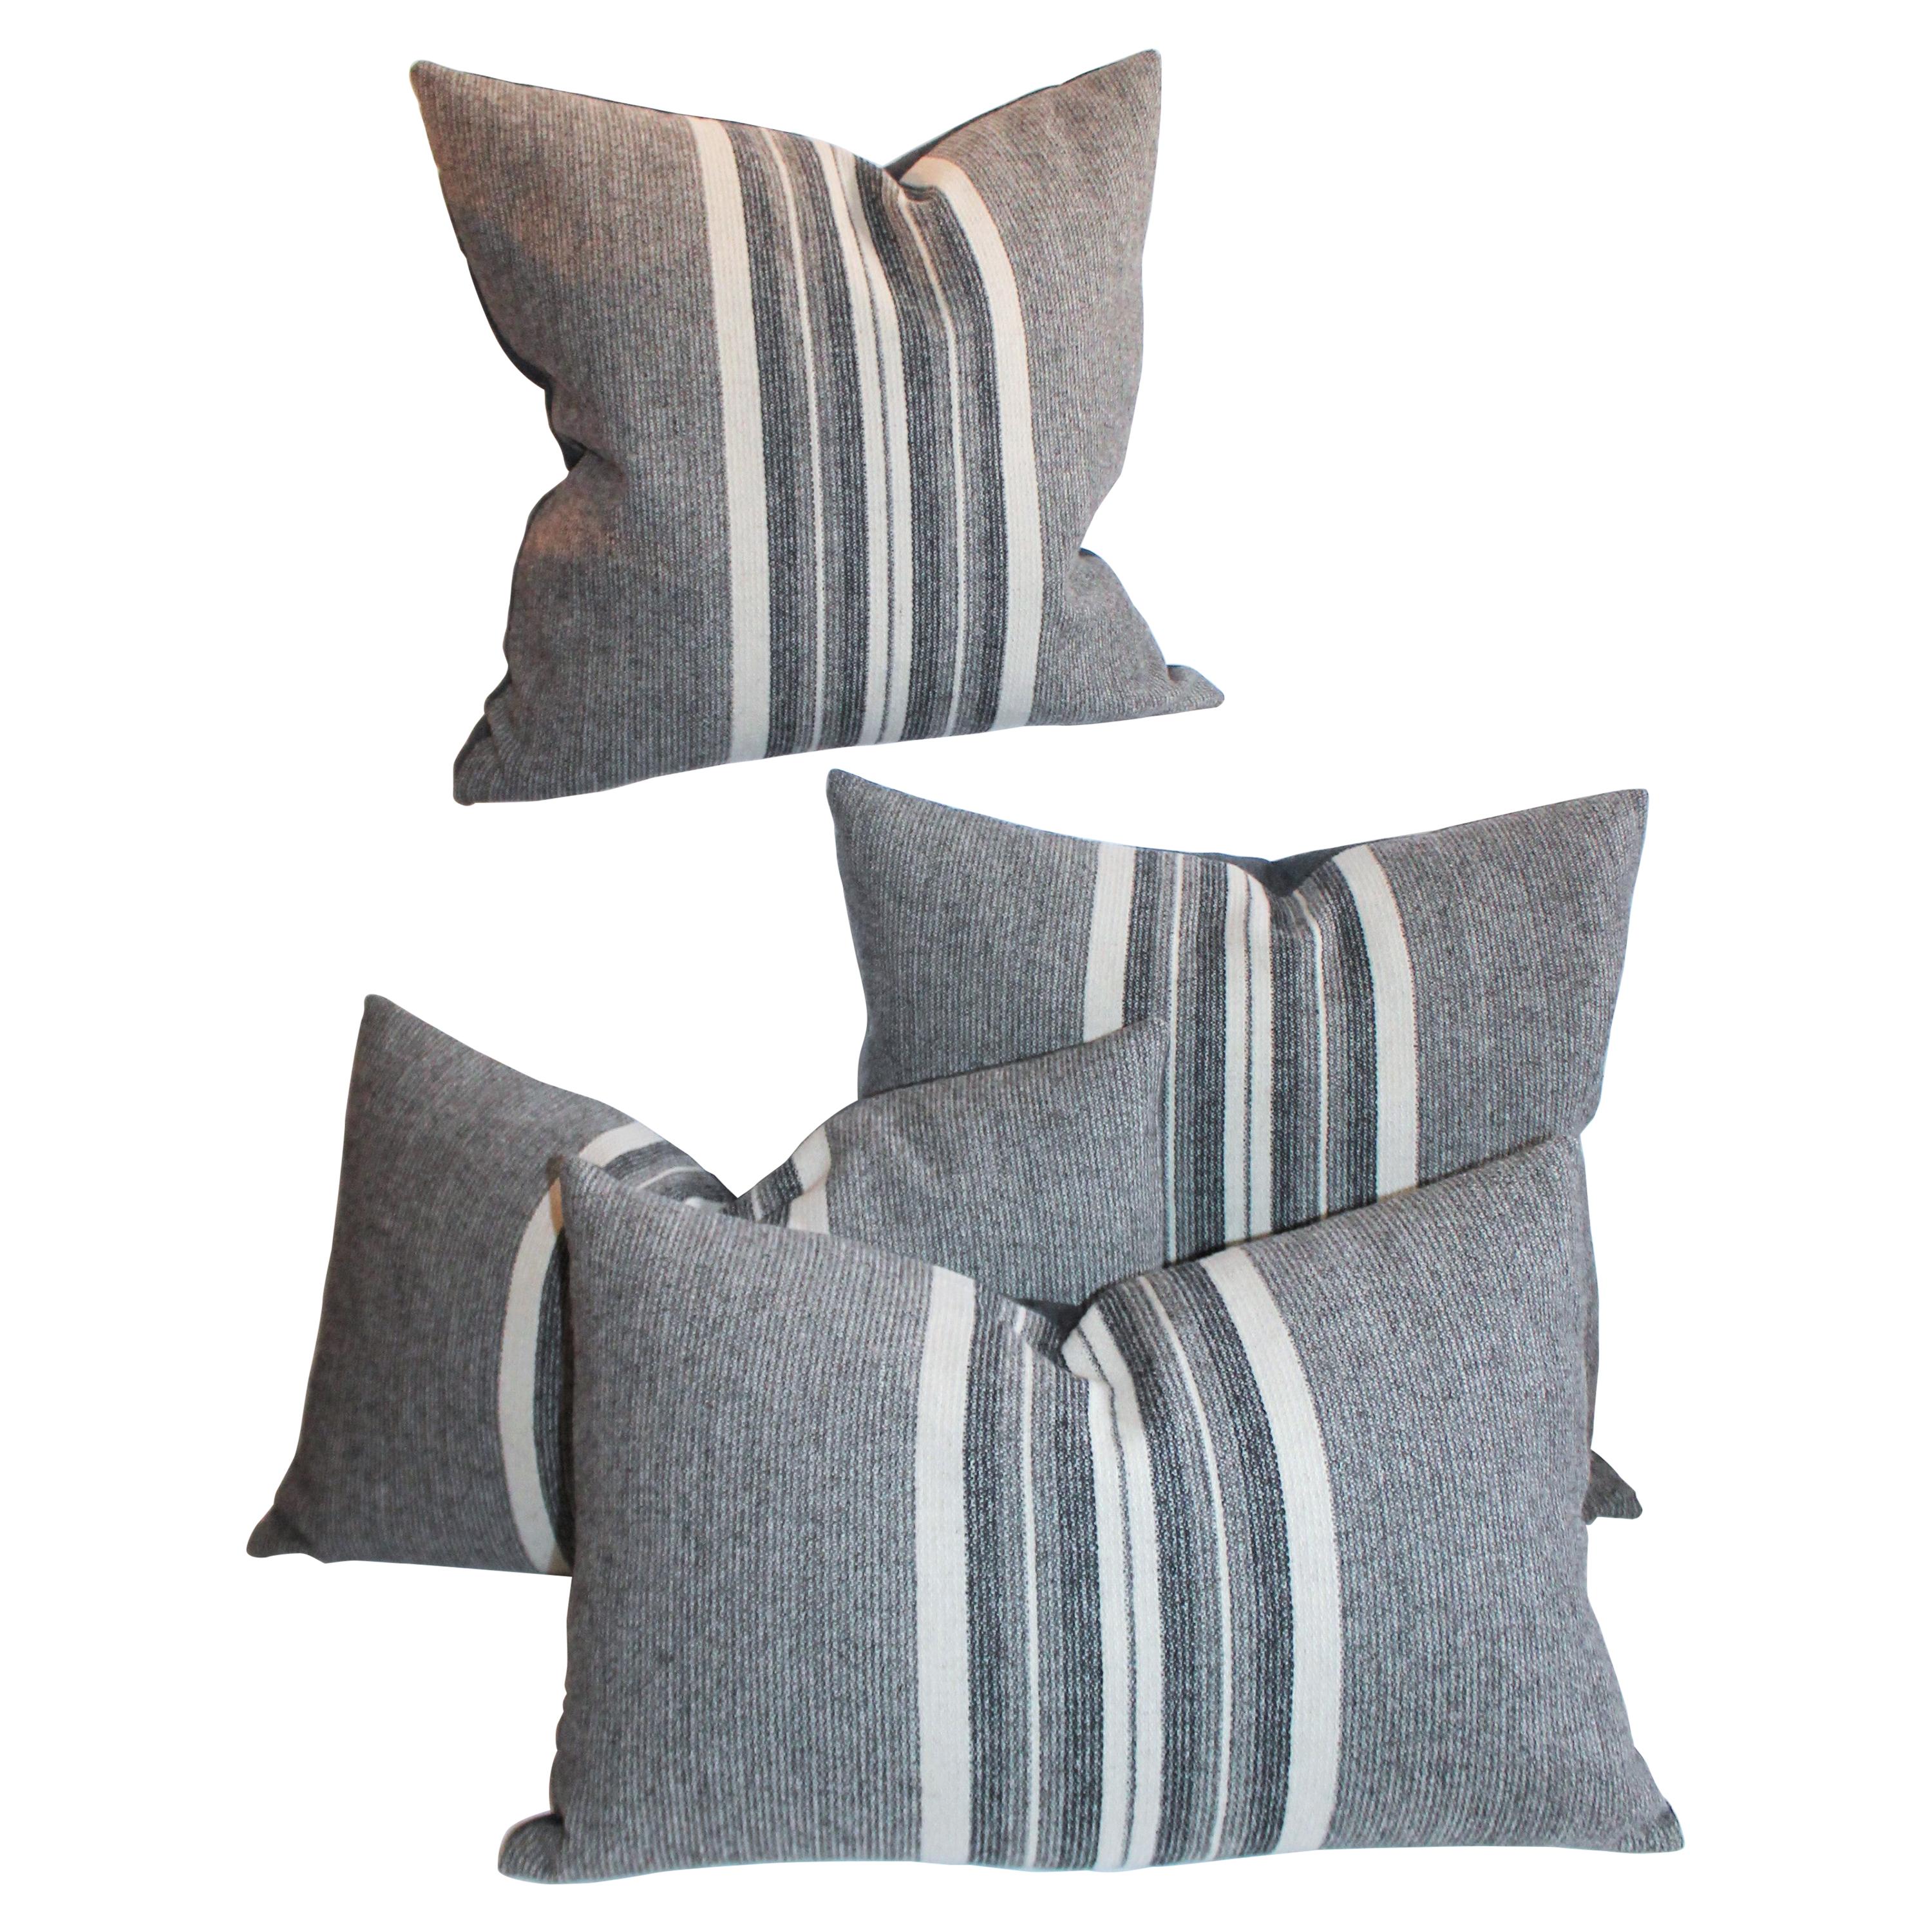 Collection of Grey Flannel Handwoven Stripped Pillows, 4 Pieces